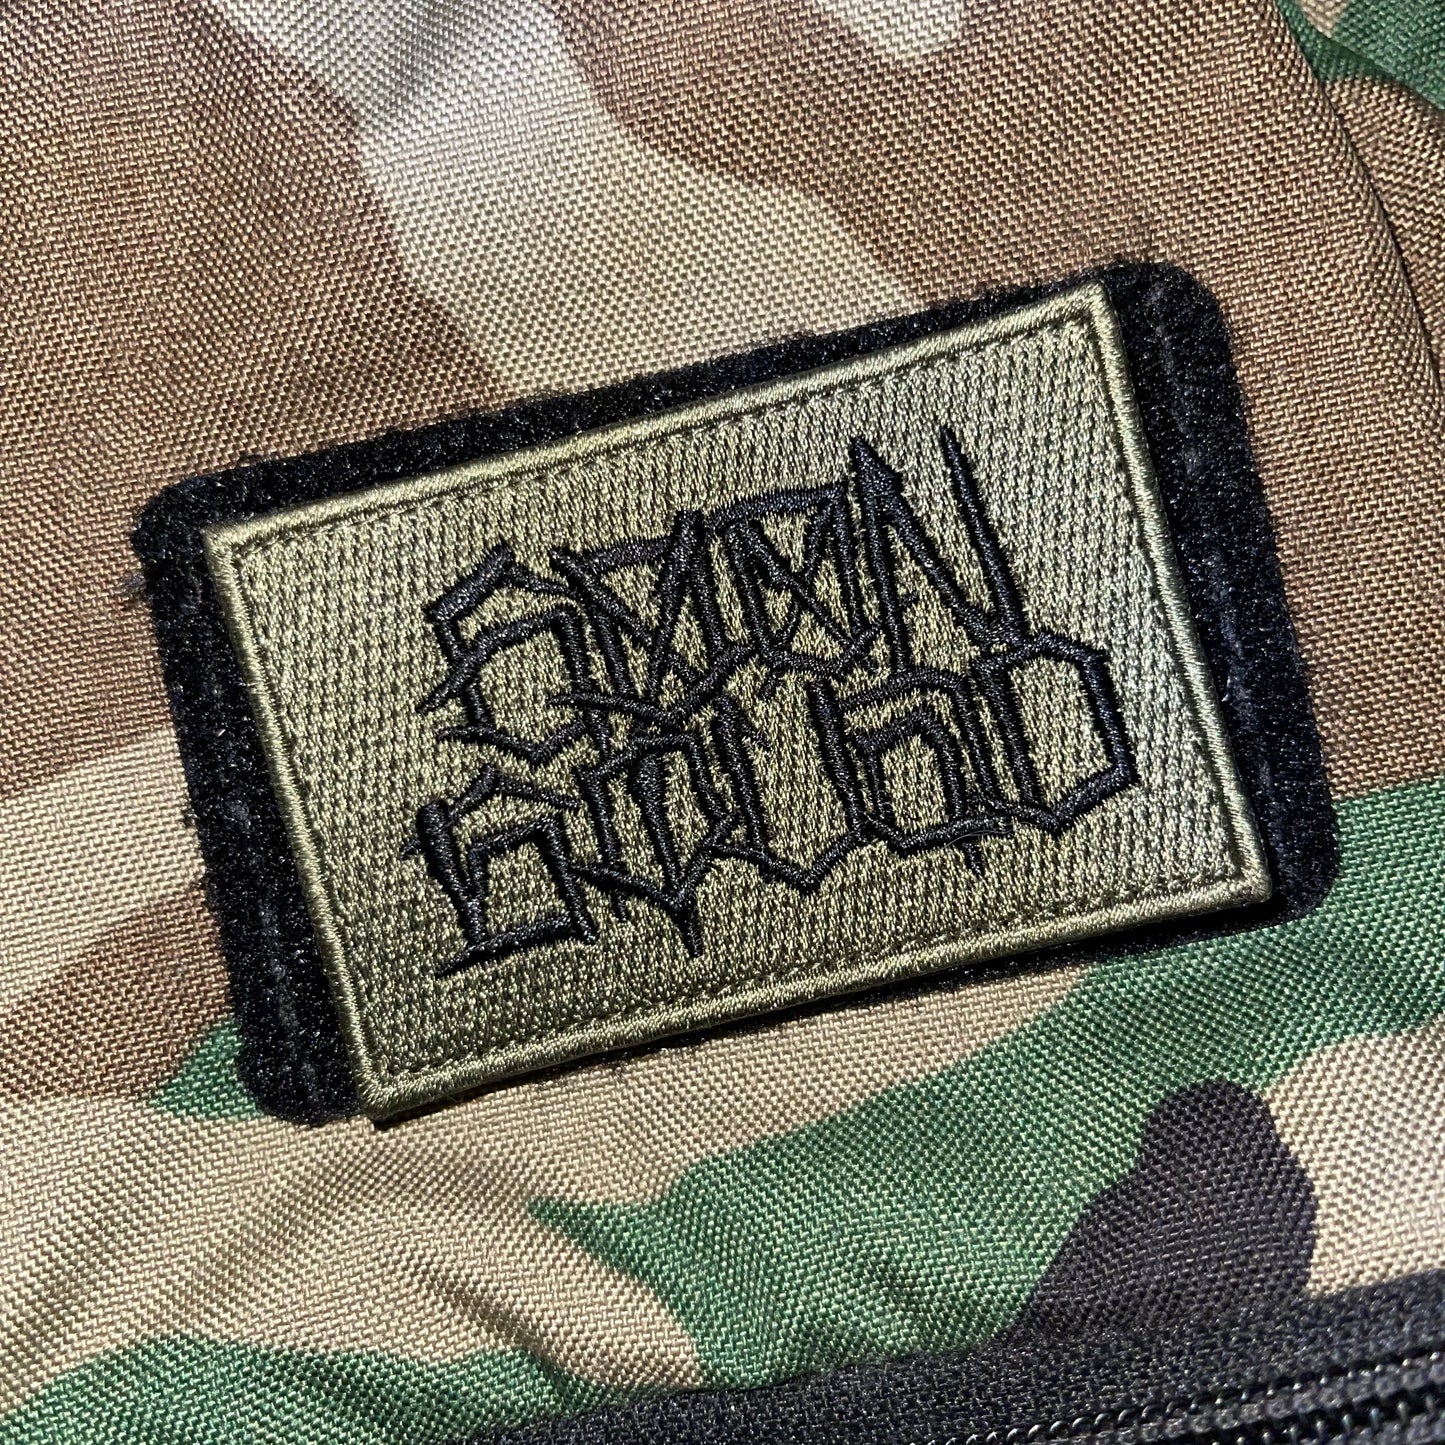 Goon Squads Embroidered Patch OD/Blk